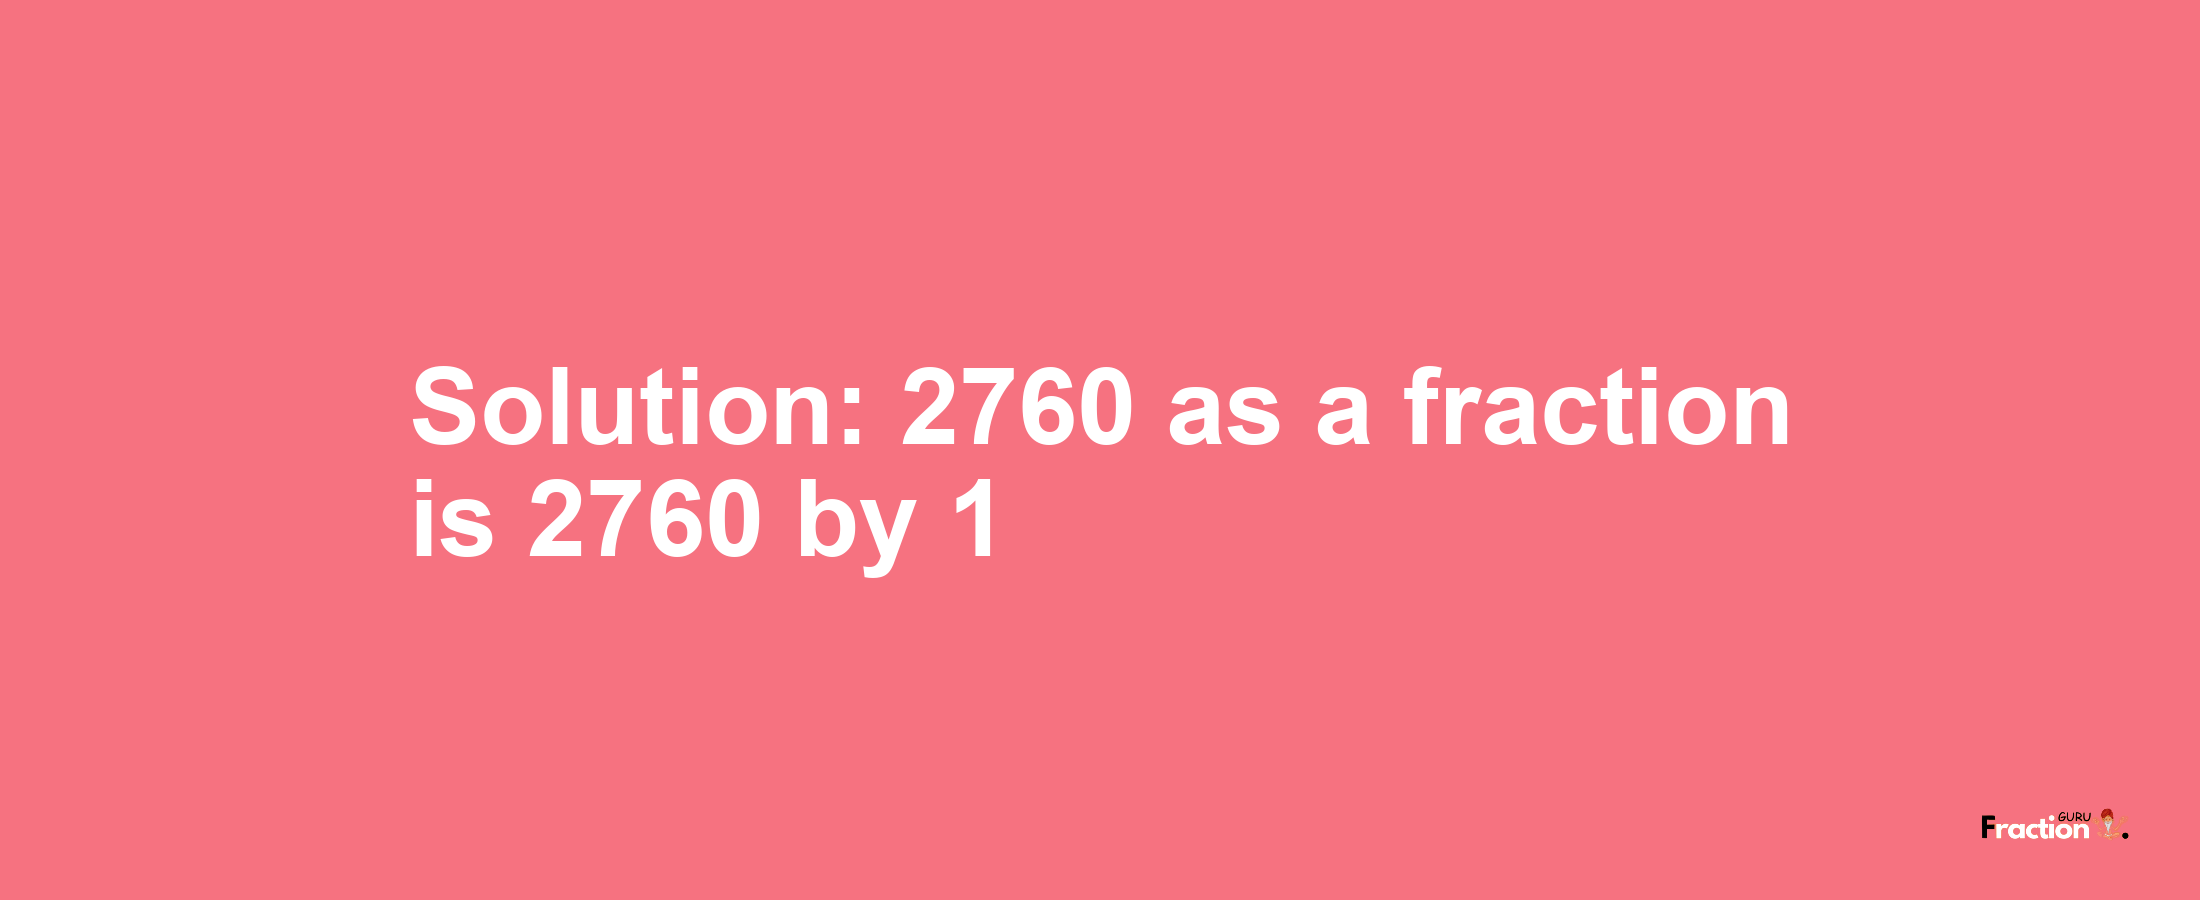 Solution:2760 as a fraction is 2760/1